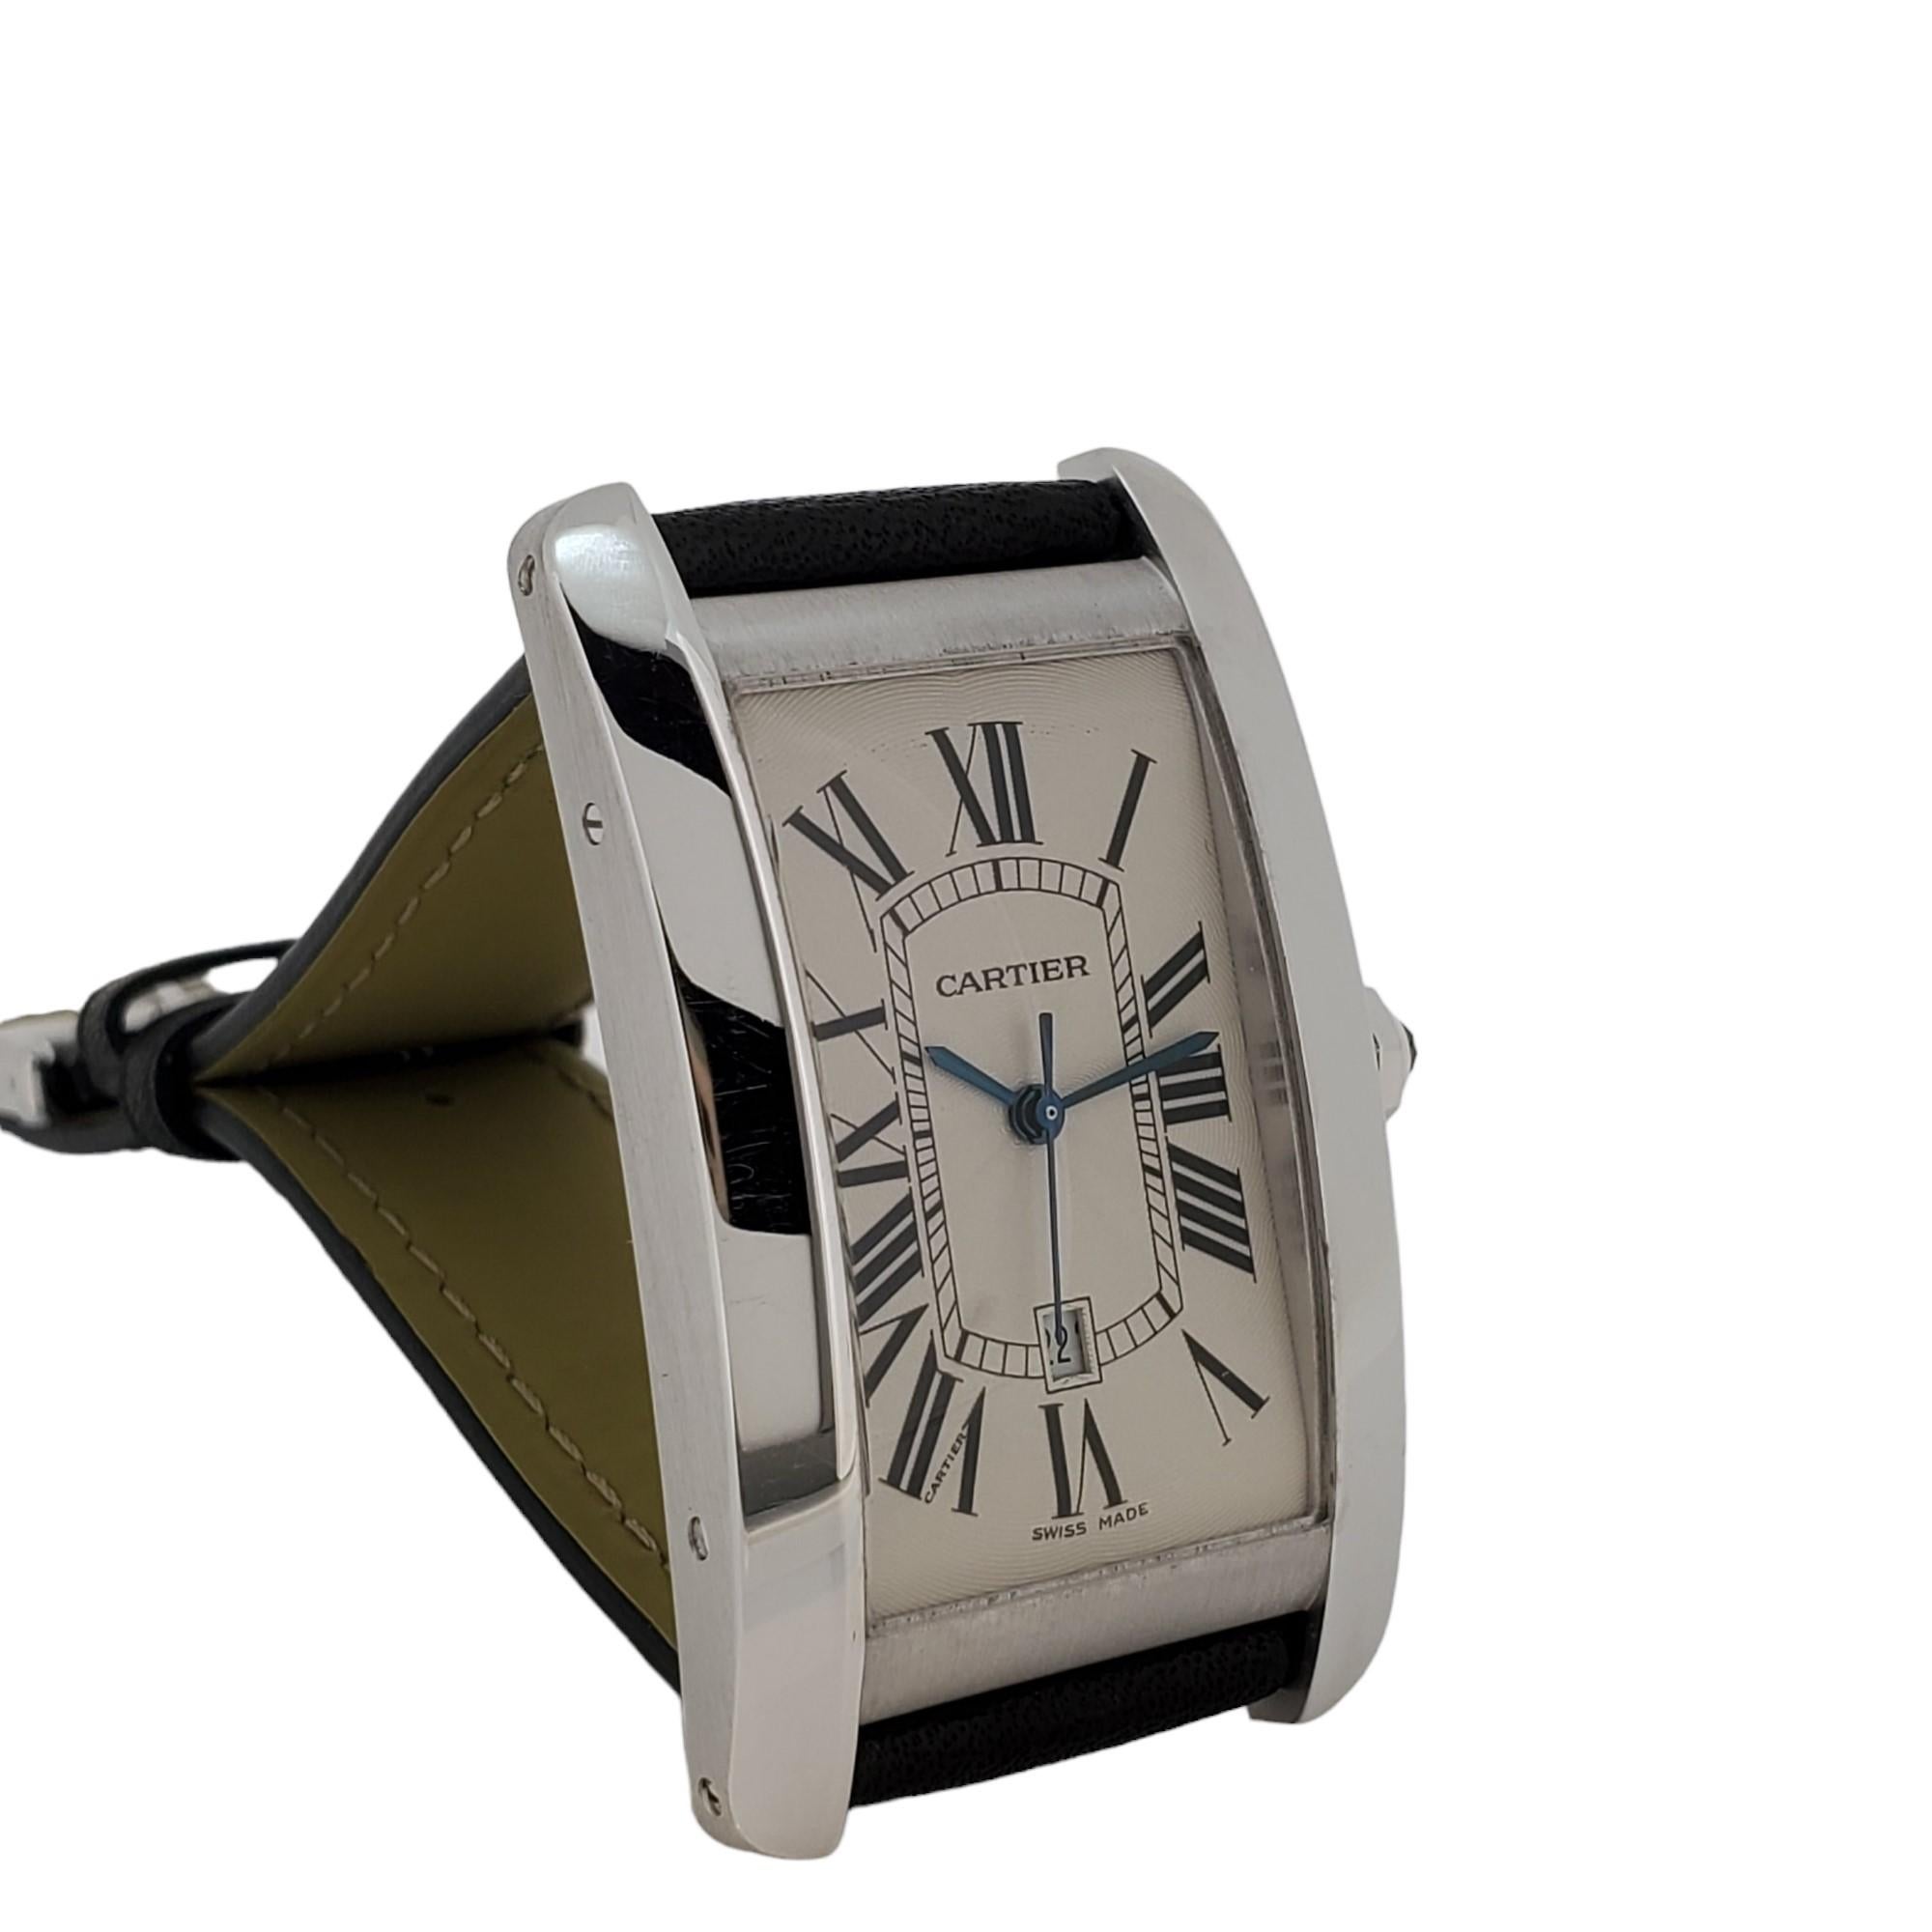 Cartier Tank Americane Large Size, Automatic, Full Set, B & P, circa 2006 In Excellent Condition For Sale In Santa Monica, CA